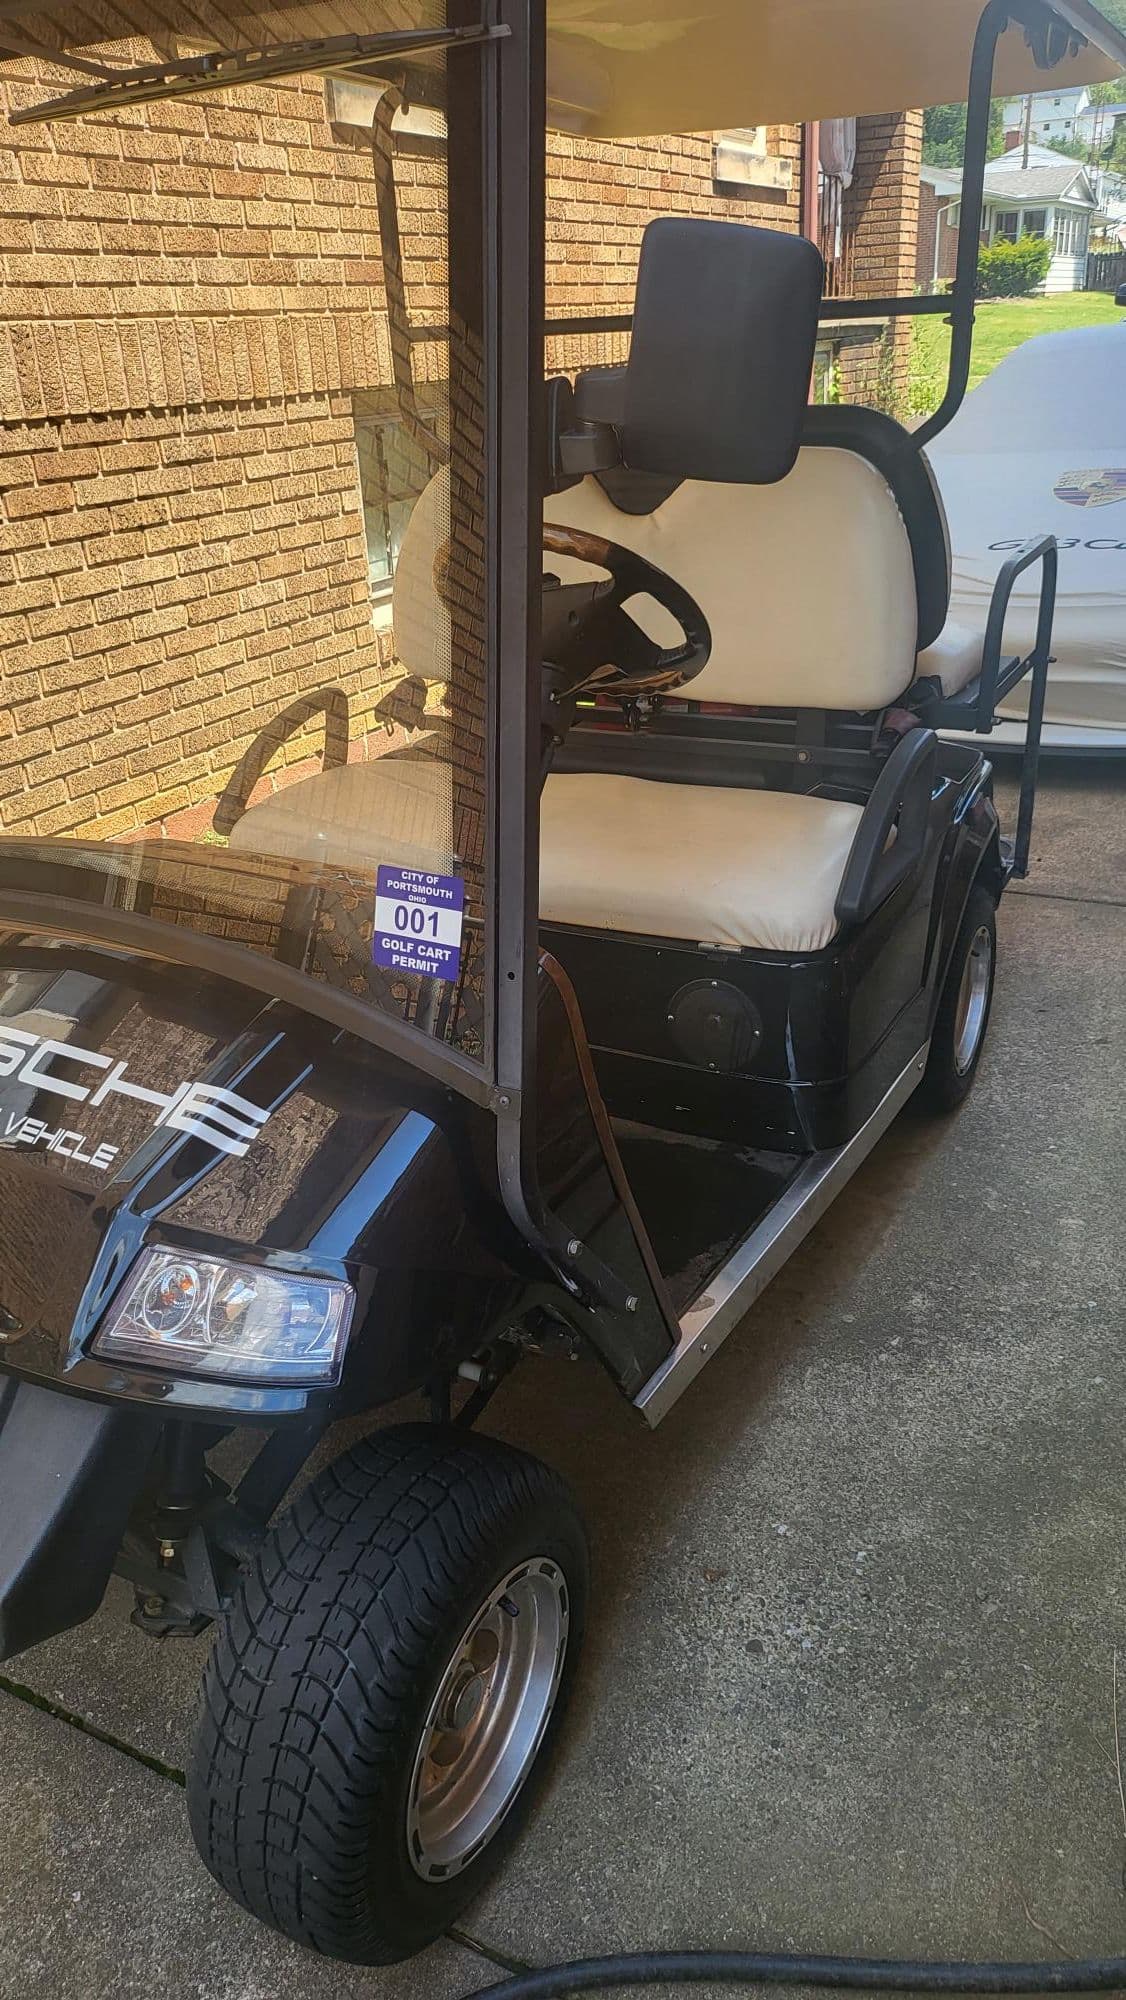 2009 Porsche 911 - 2009 Zone Electric Golf Cart price for quick sale - Used - VIN 1GC4YNEY2NF138570 - Portsmouth, OH 45662, United States